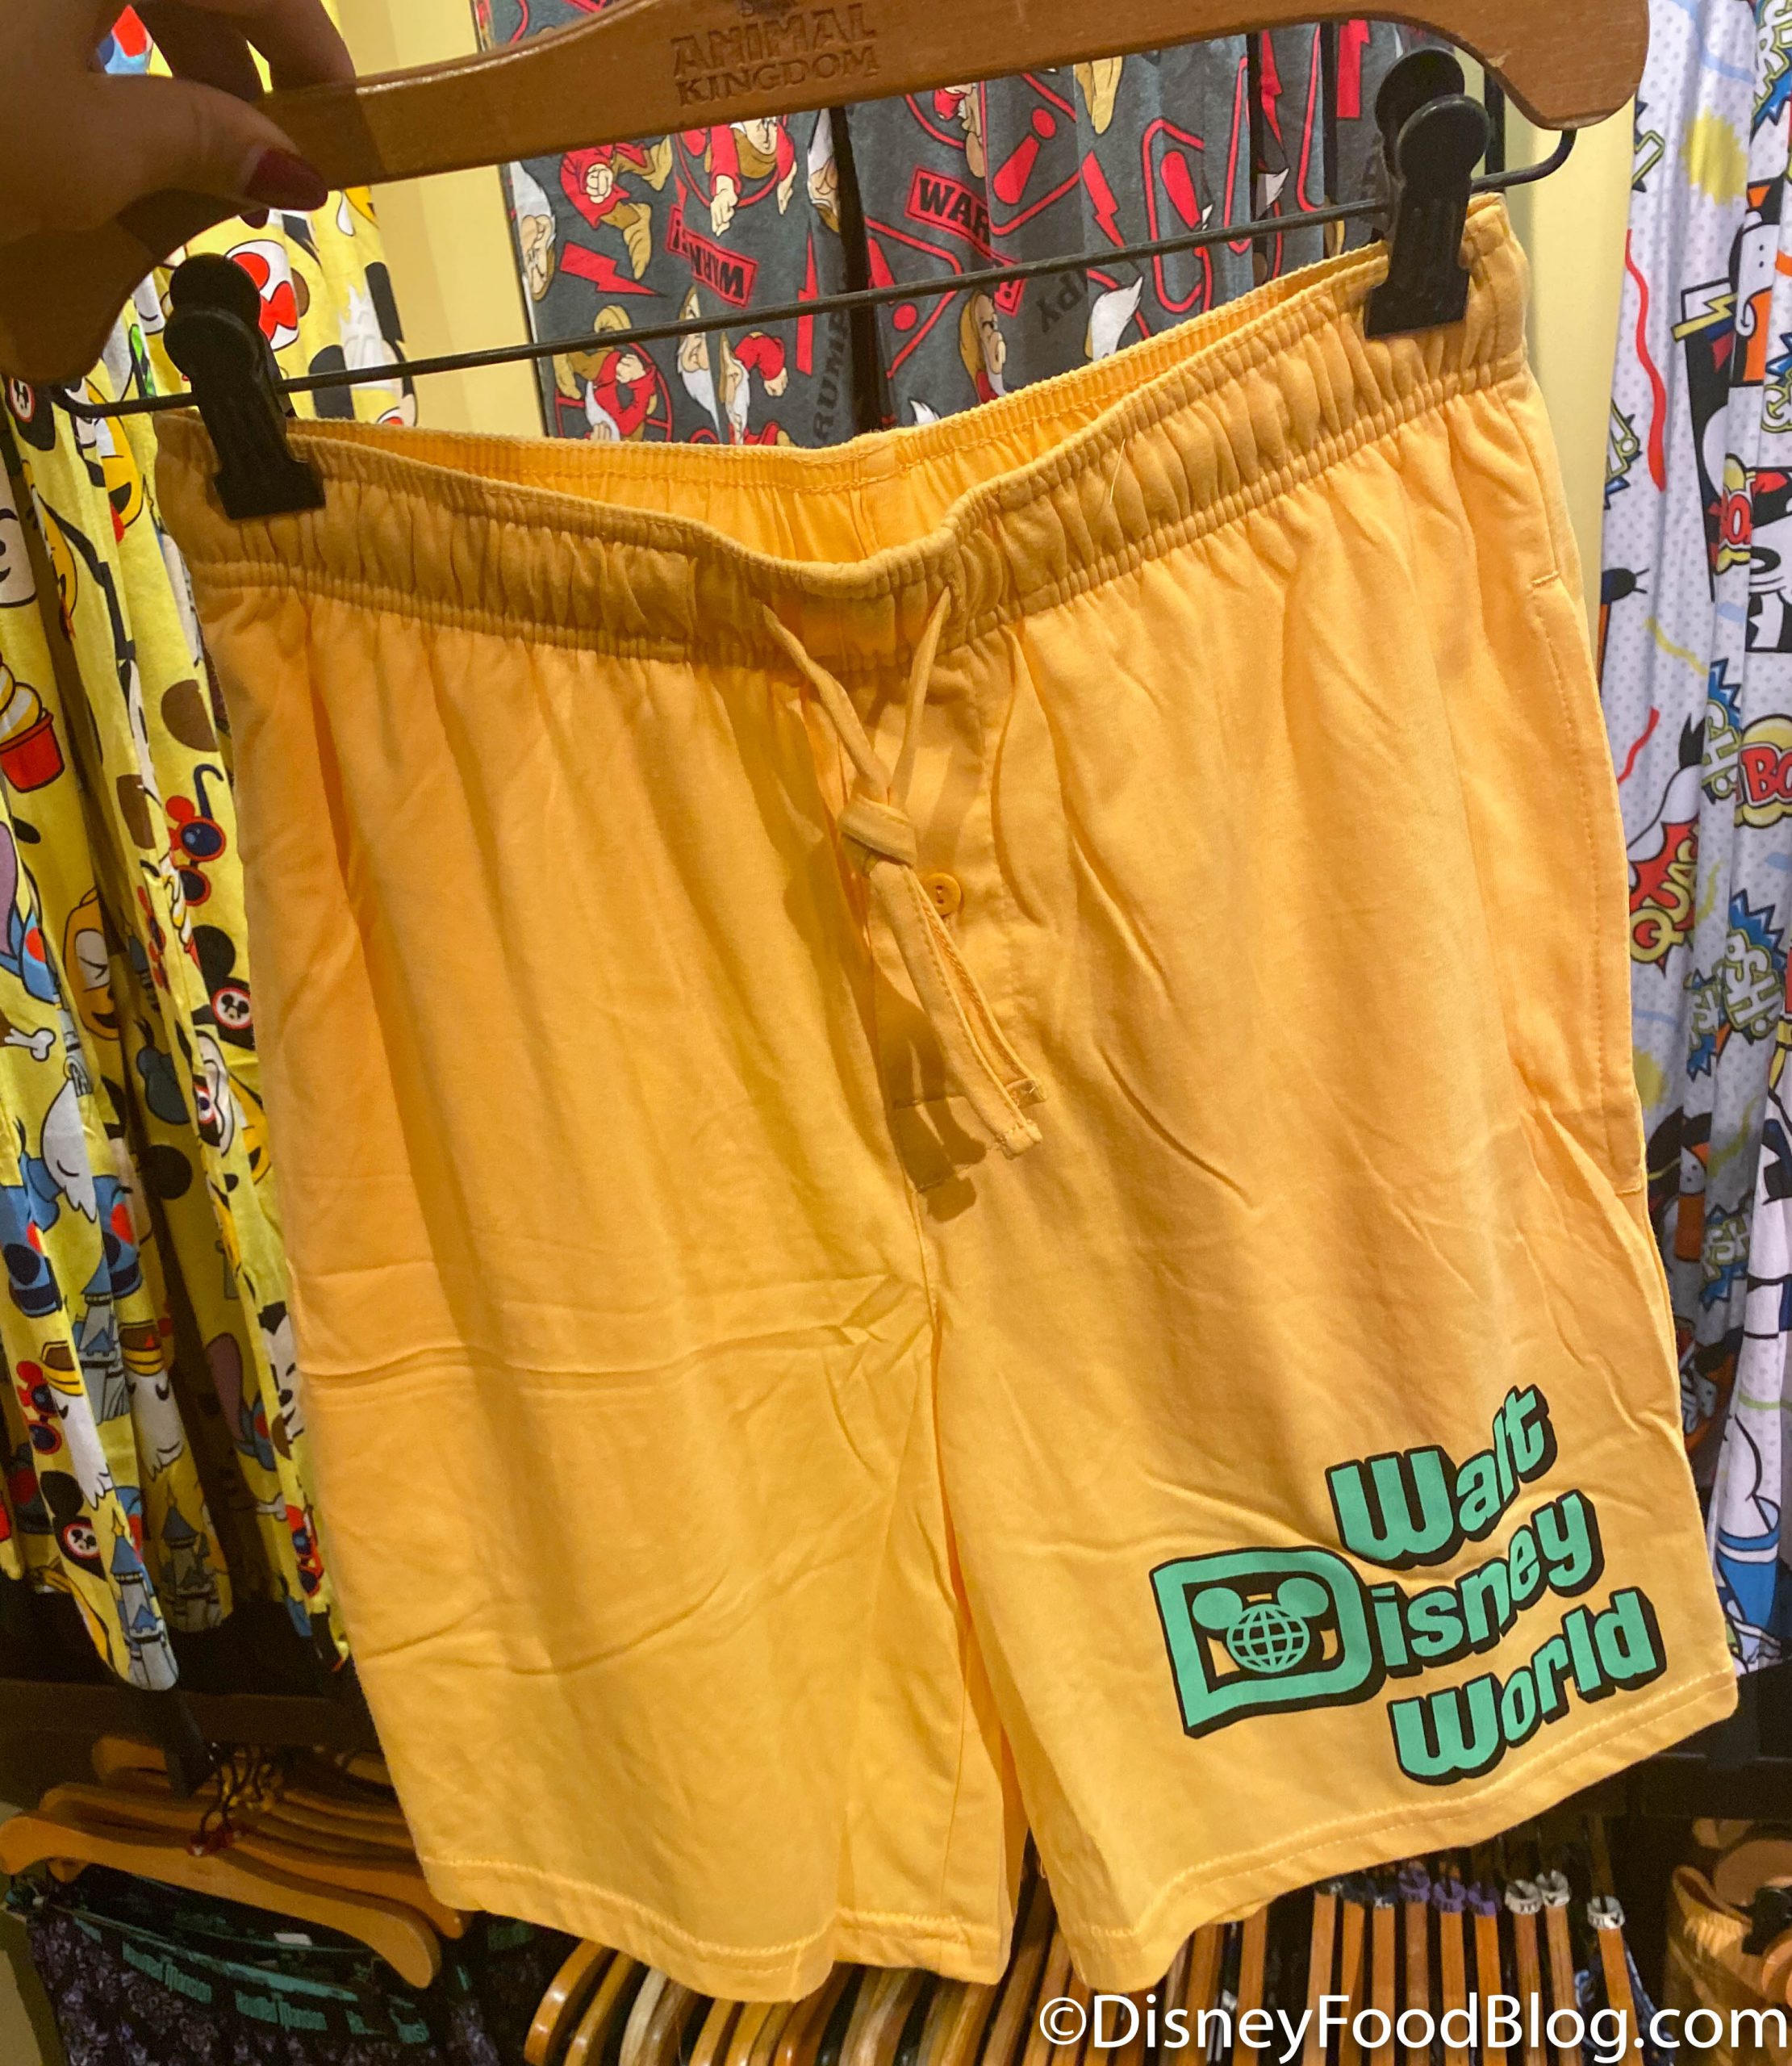 PHOTOS: New Haunted Mansion Shorts and Leggings Available at Walt